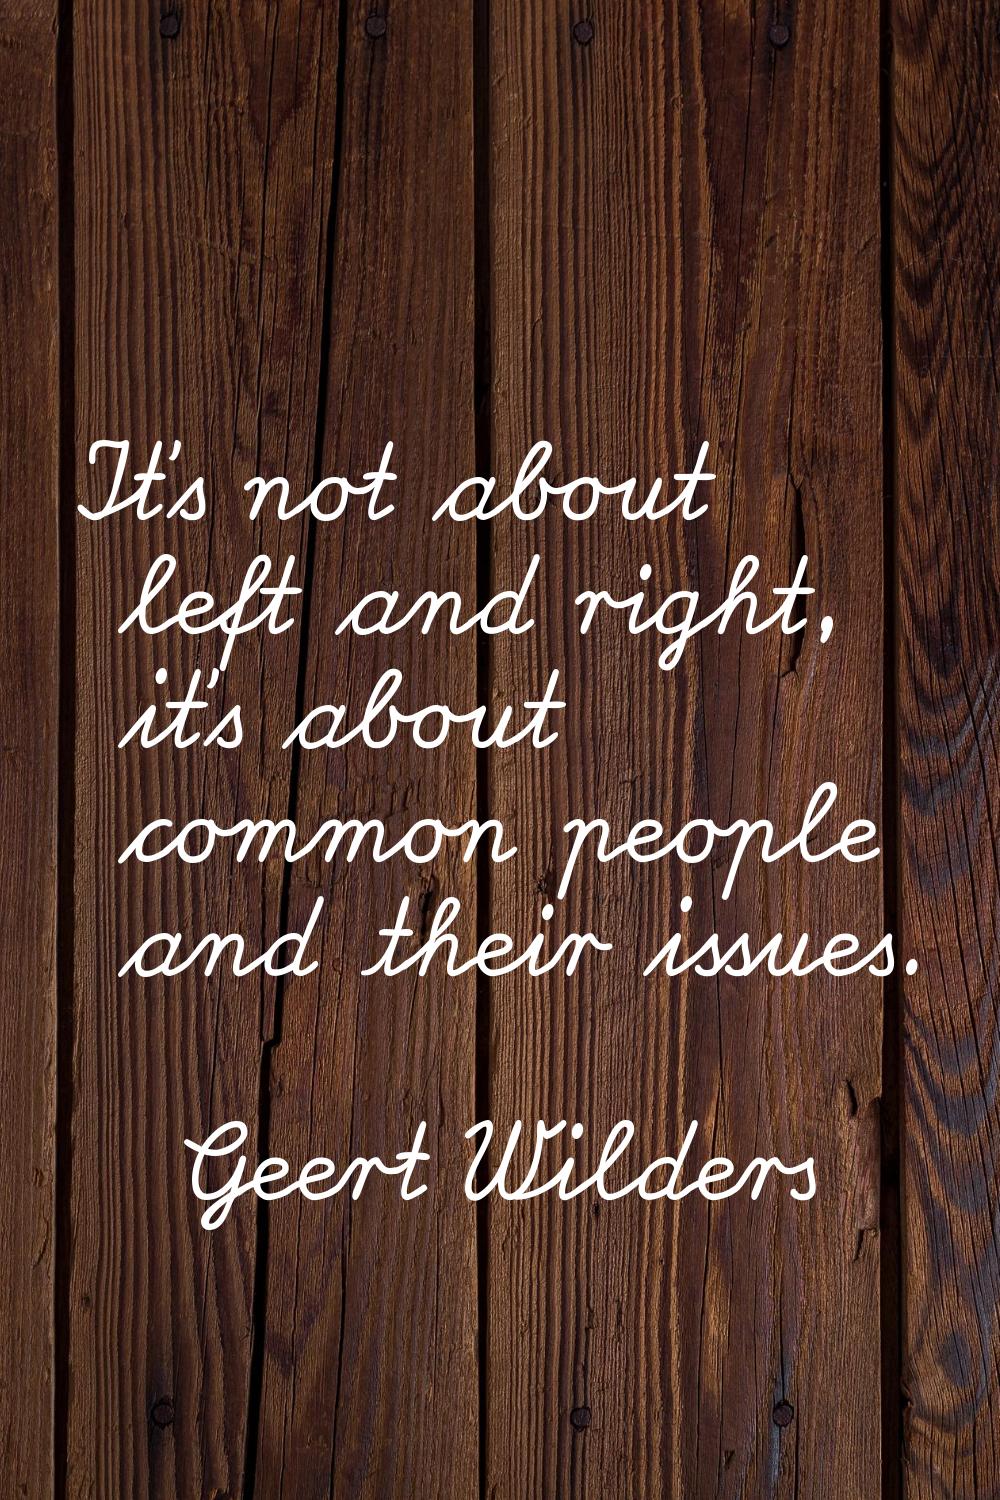 It's not about left and right, it's about common people and their issues.